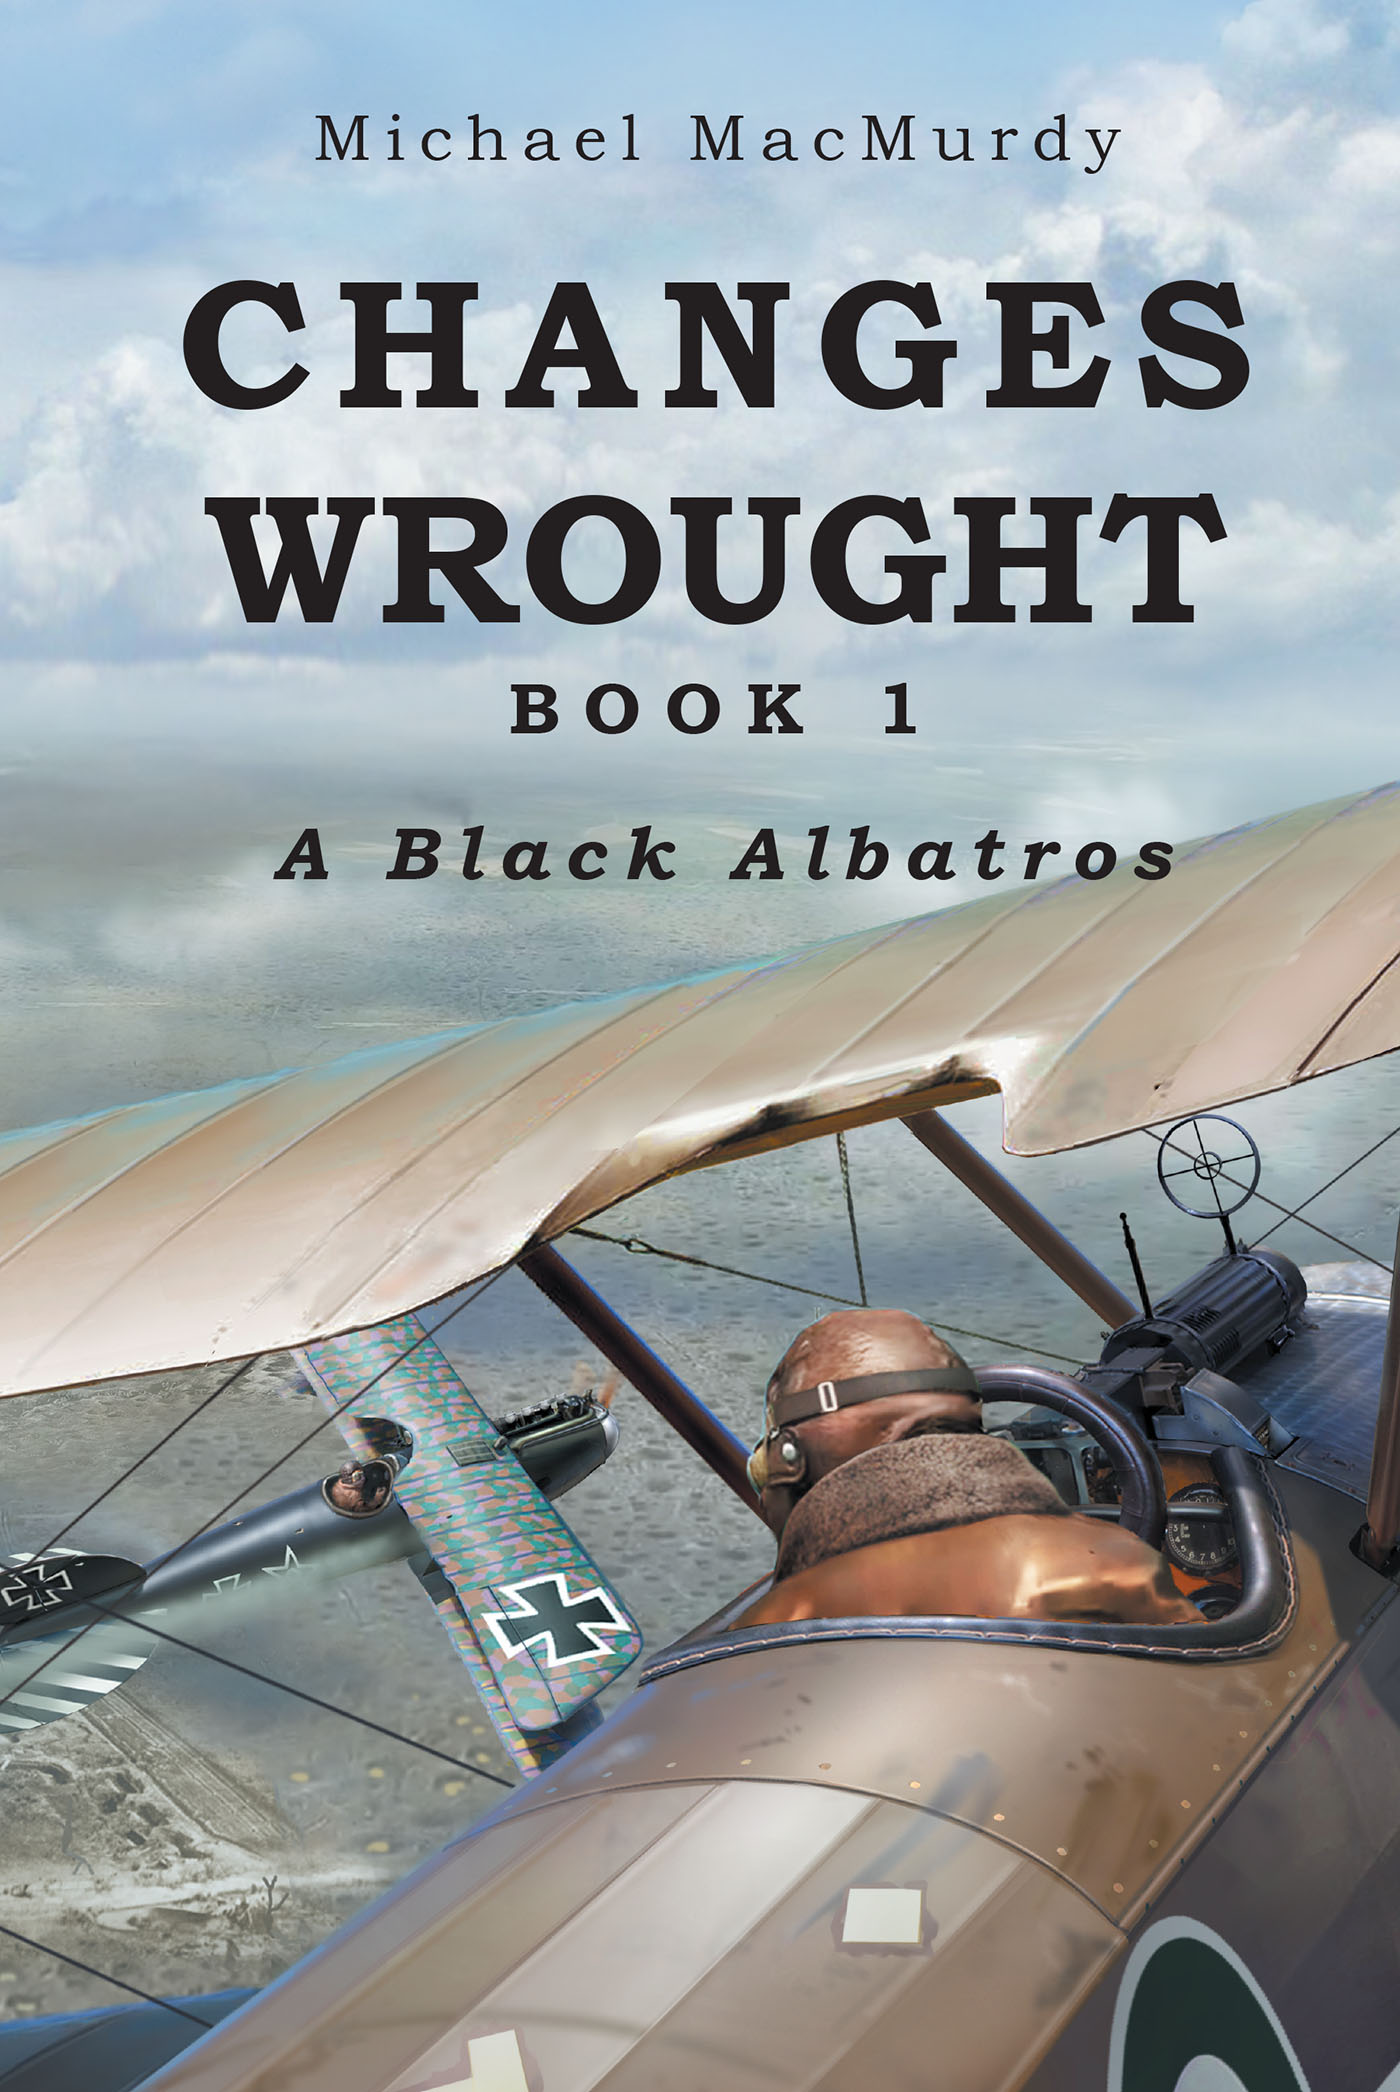 Author Michael Macmurdy’s New Book, "Changes Wrought: A Black Albatros," Follows Four Members of the British Royal Flying Corps in the Summer of 1917 During World War One